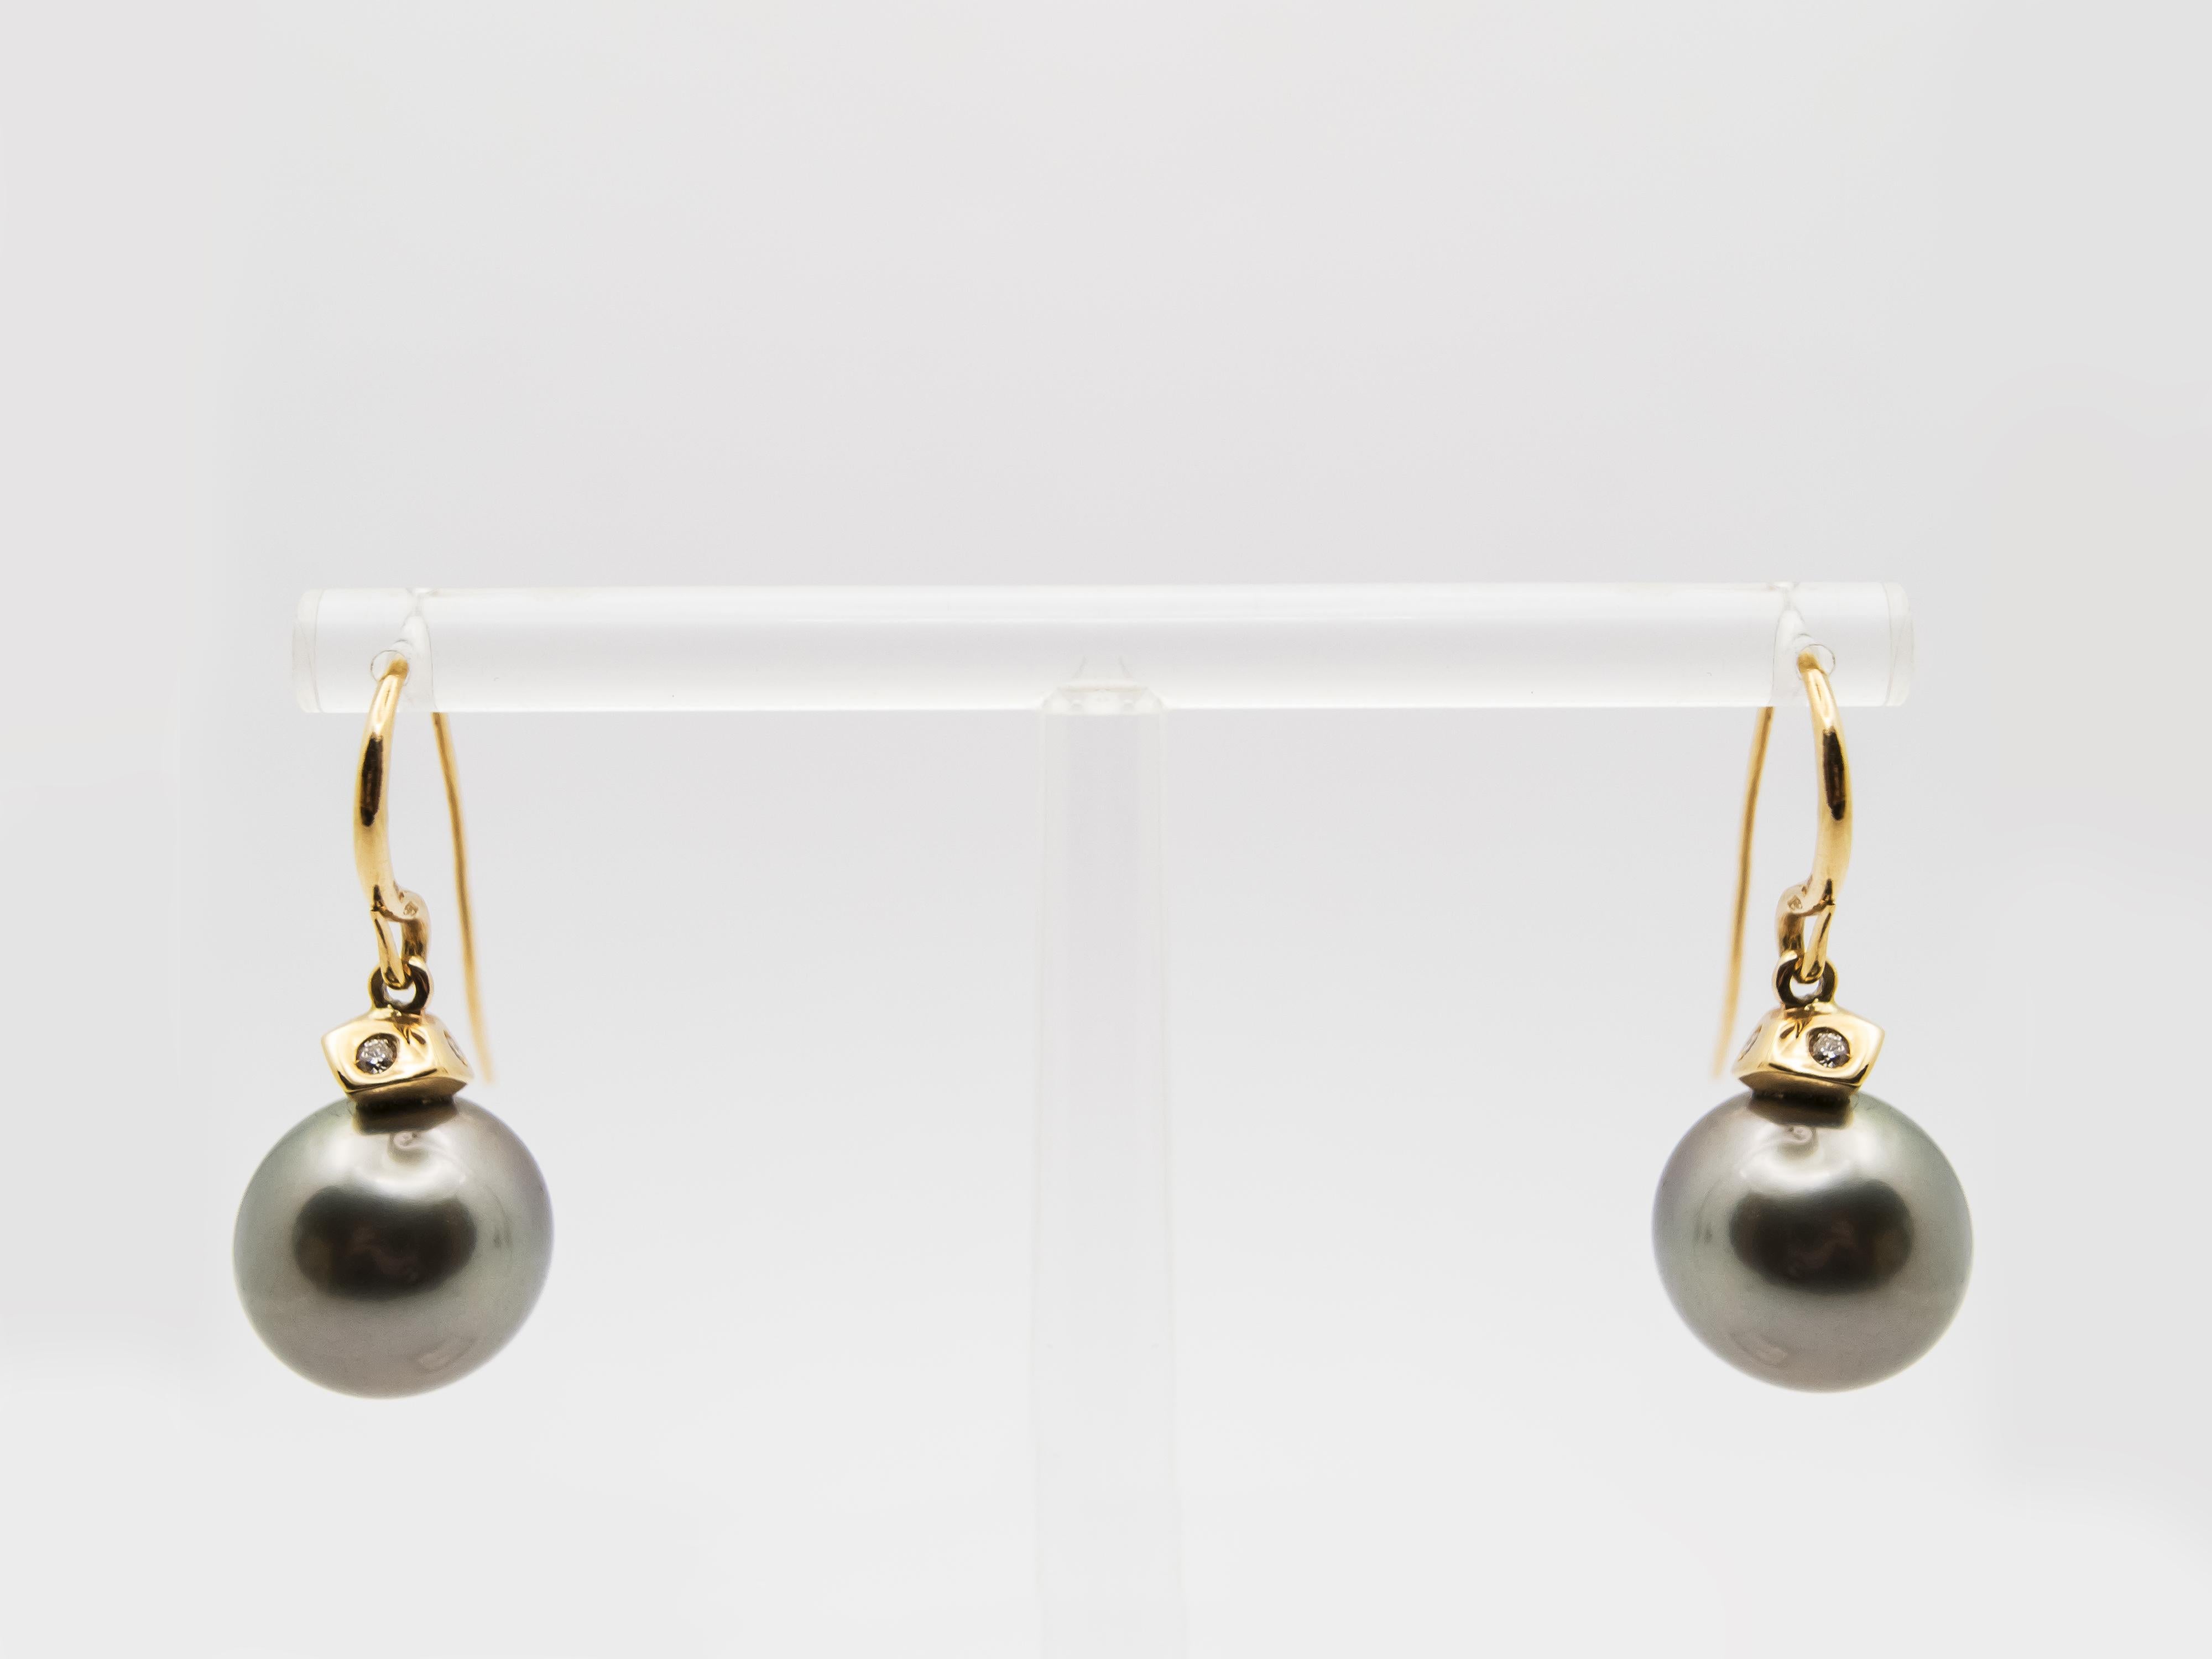 A pair of precious earrings with elegant and contemporary style.
Their design is enhanced by Tahitian pearls that have a magnificent balanced gray color and are at the same time very bright 
The diameter of the pearls is 12.8 mm and they have a